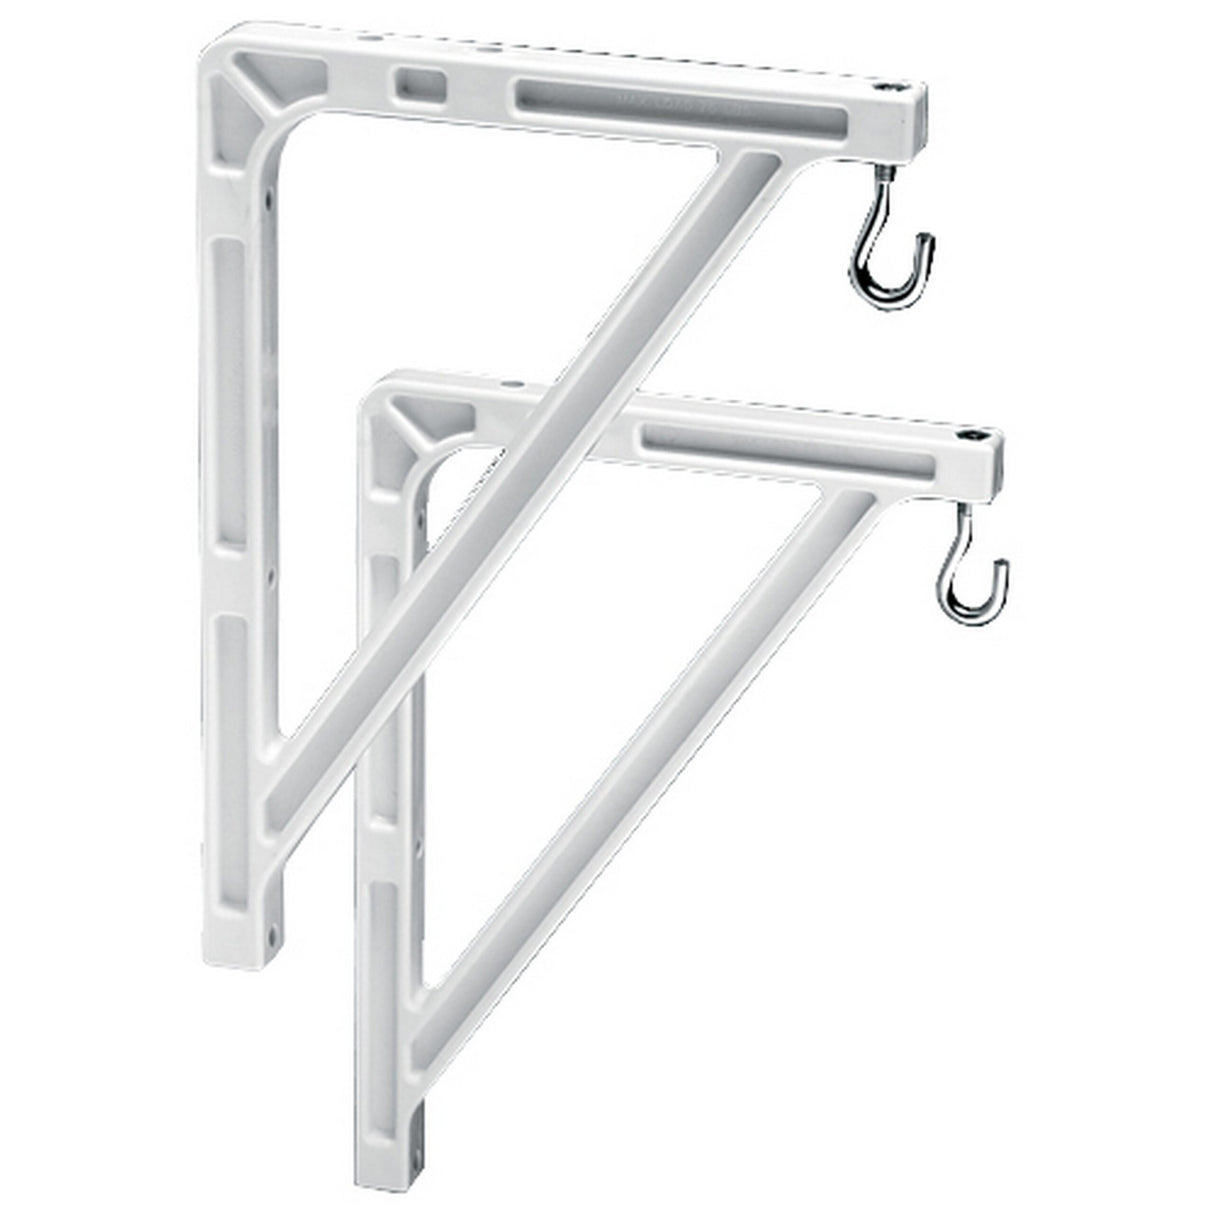 Da-Lite 40957 Mounting and Extension Brackets, Pair